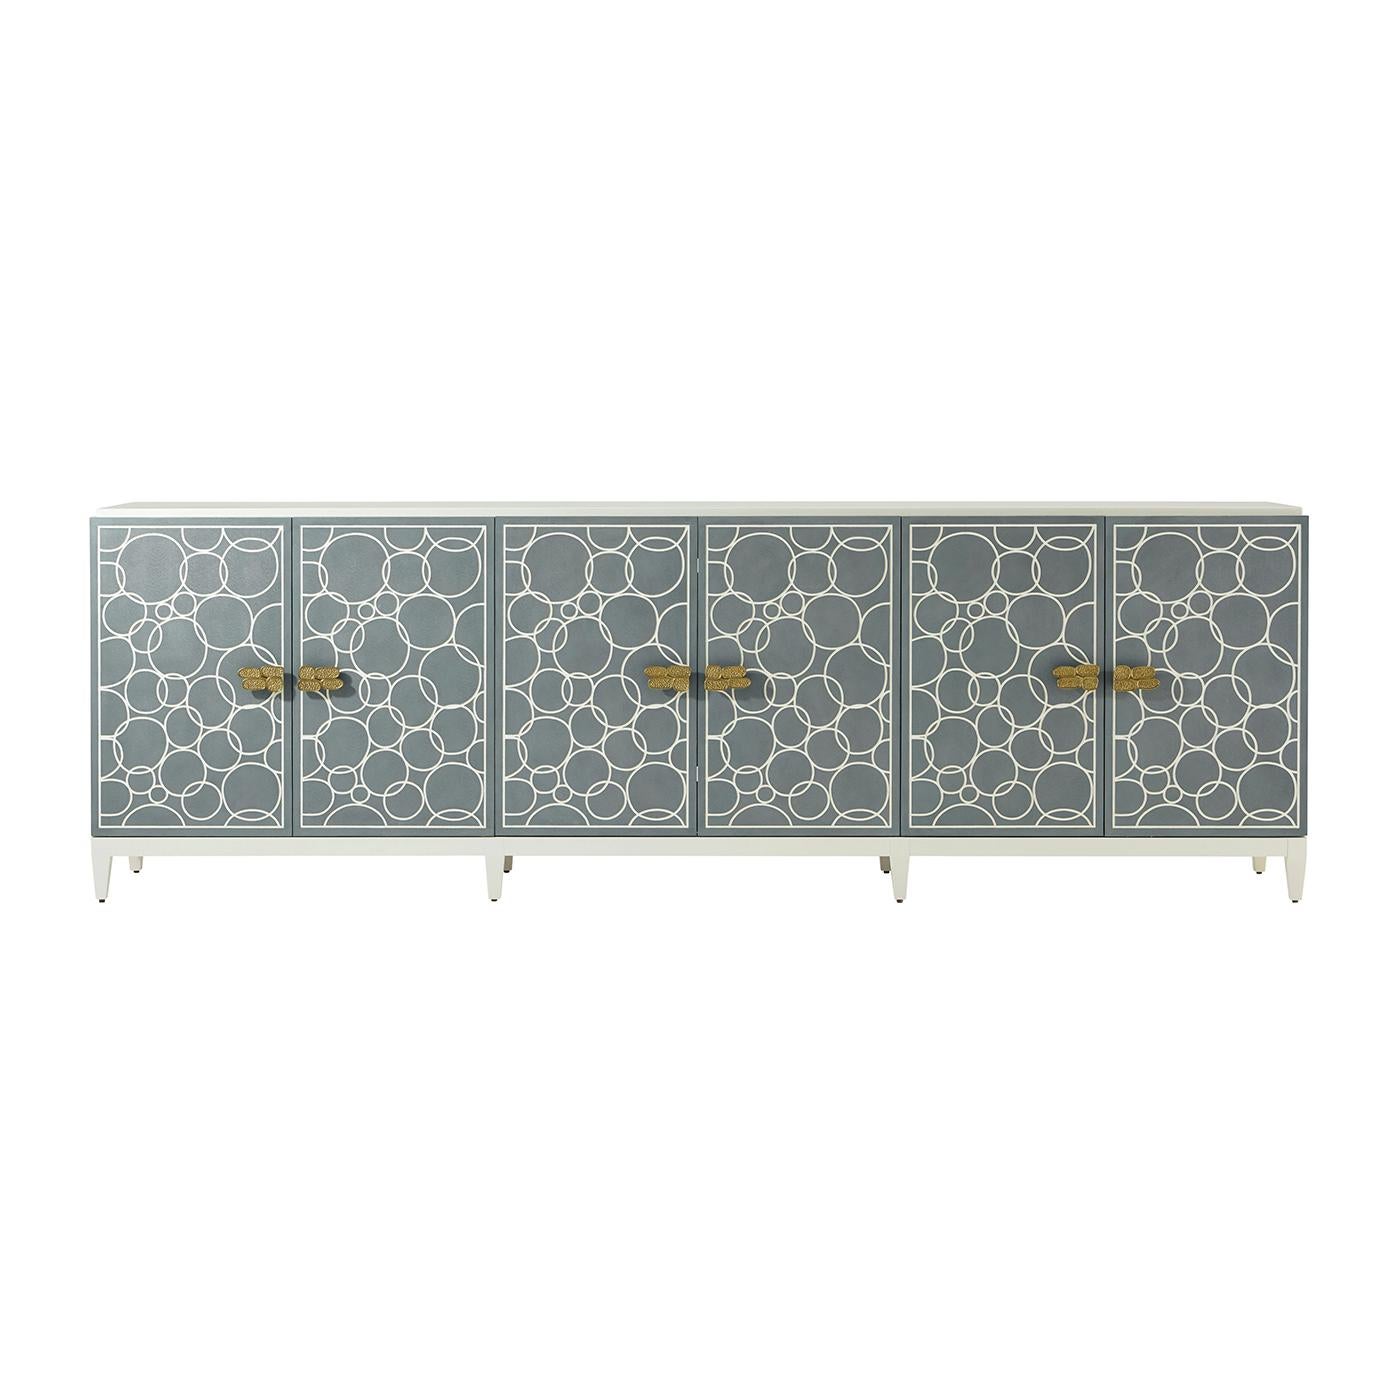 The sideboard cabinet seen in our White Dove lacquer finish is designed to be a statement piece. With six recon shagreen embossed leather doors in our Sea Foam finish are paired with a polished hammered aluminum handle. Adjustable shelving is